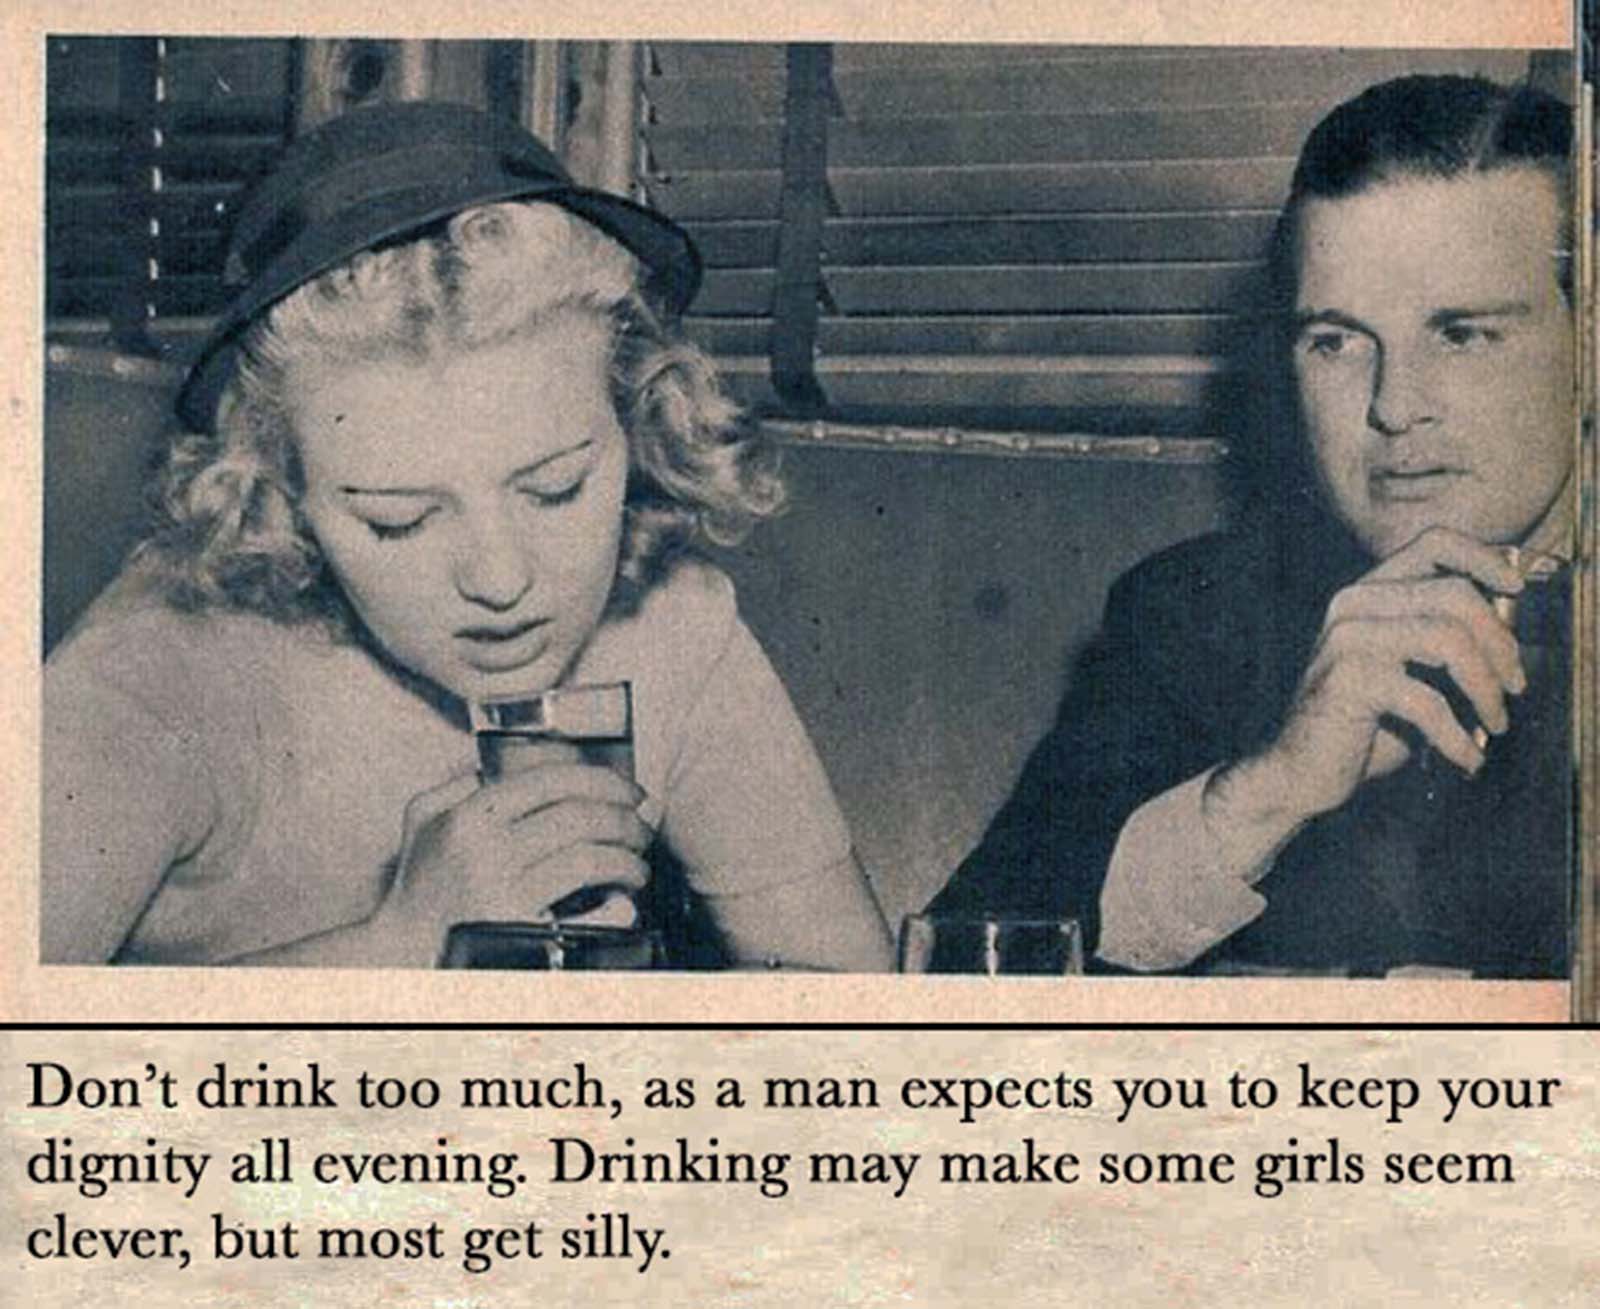 Don't drink too much, as a man expects you to keep your dignity all evening.